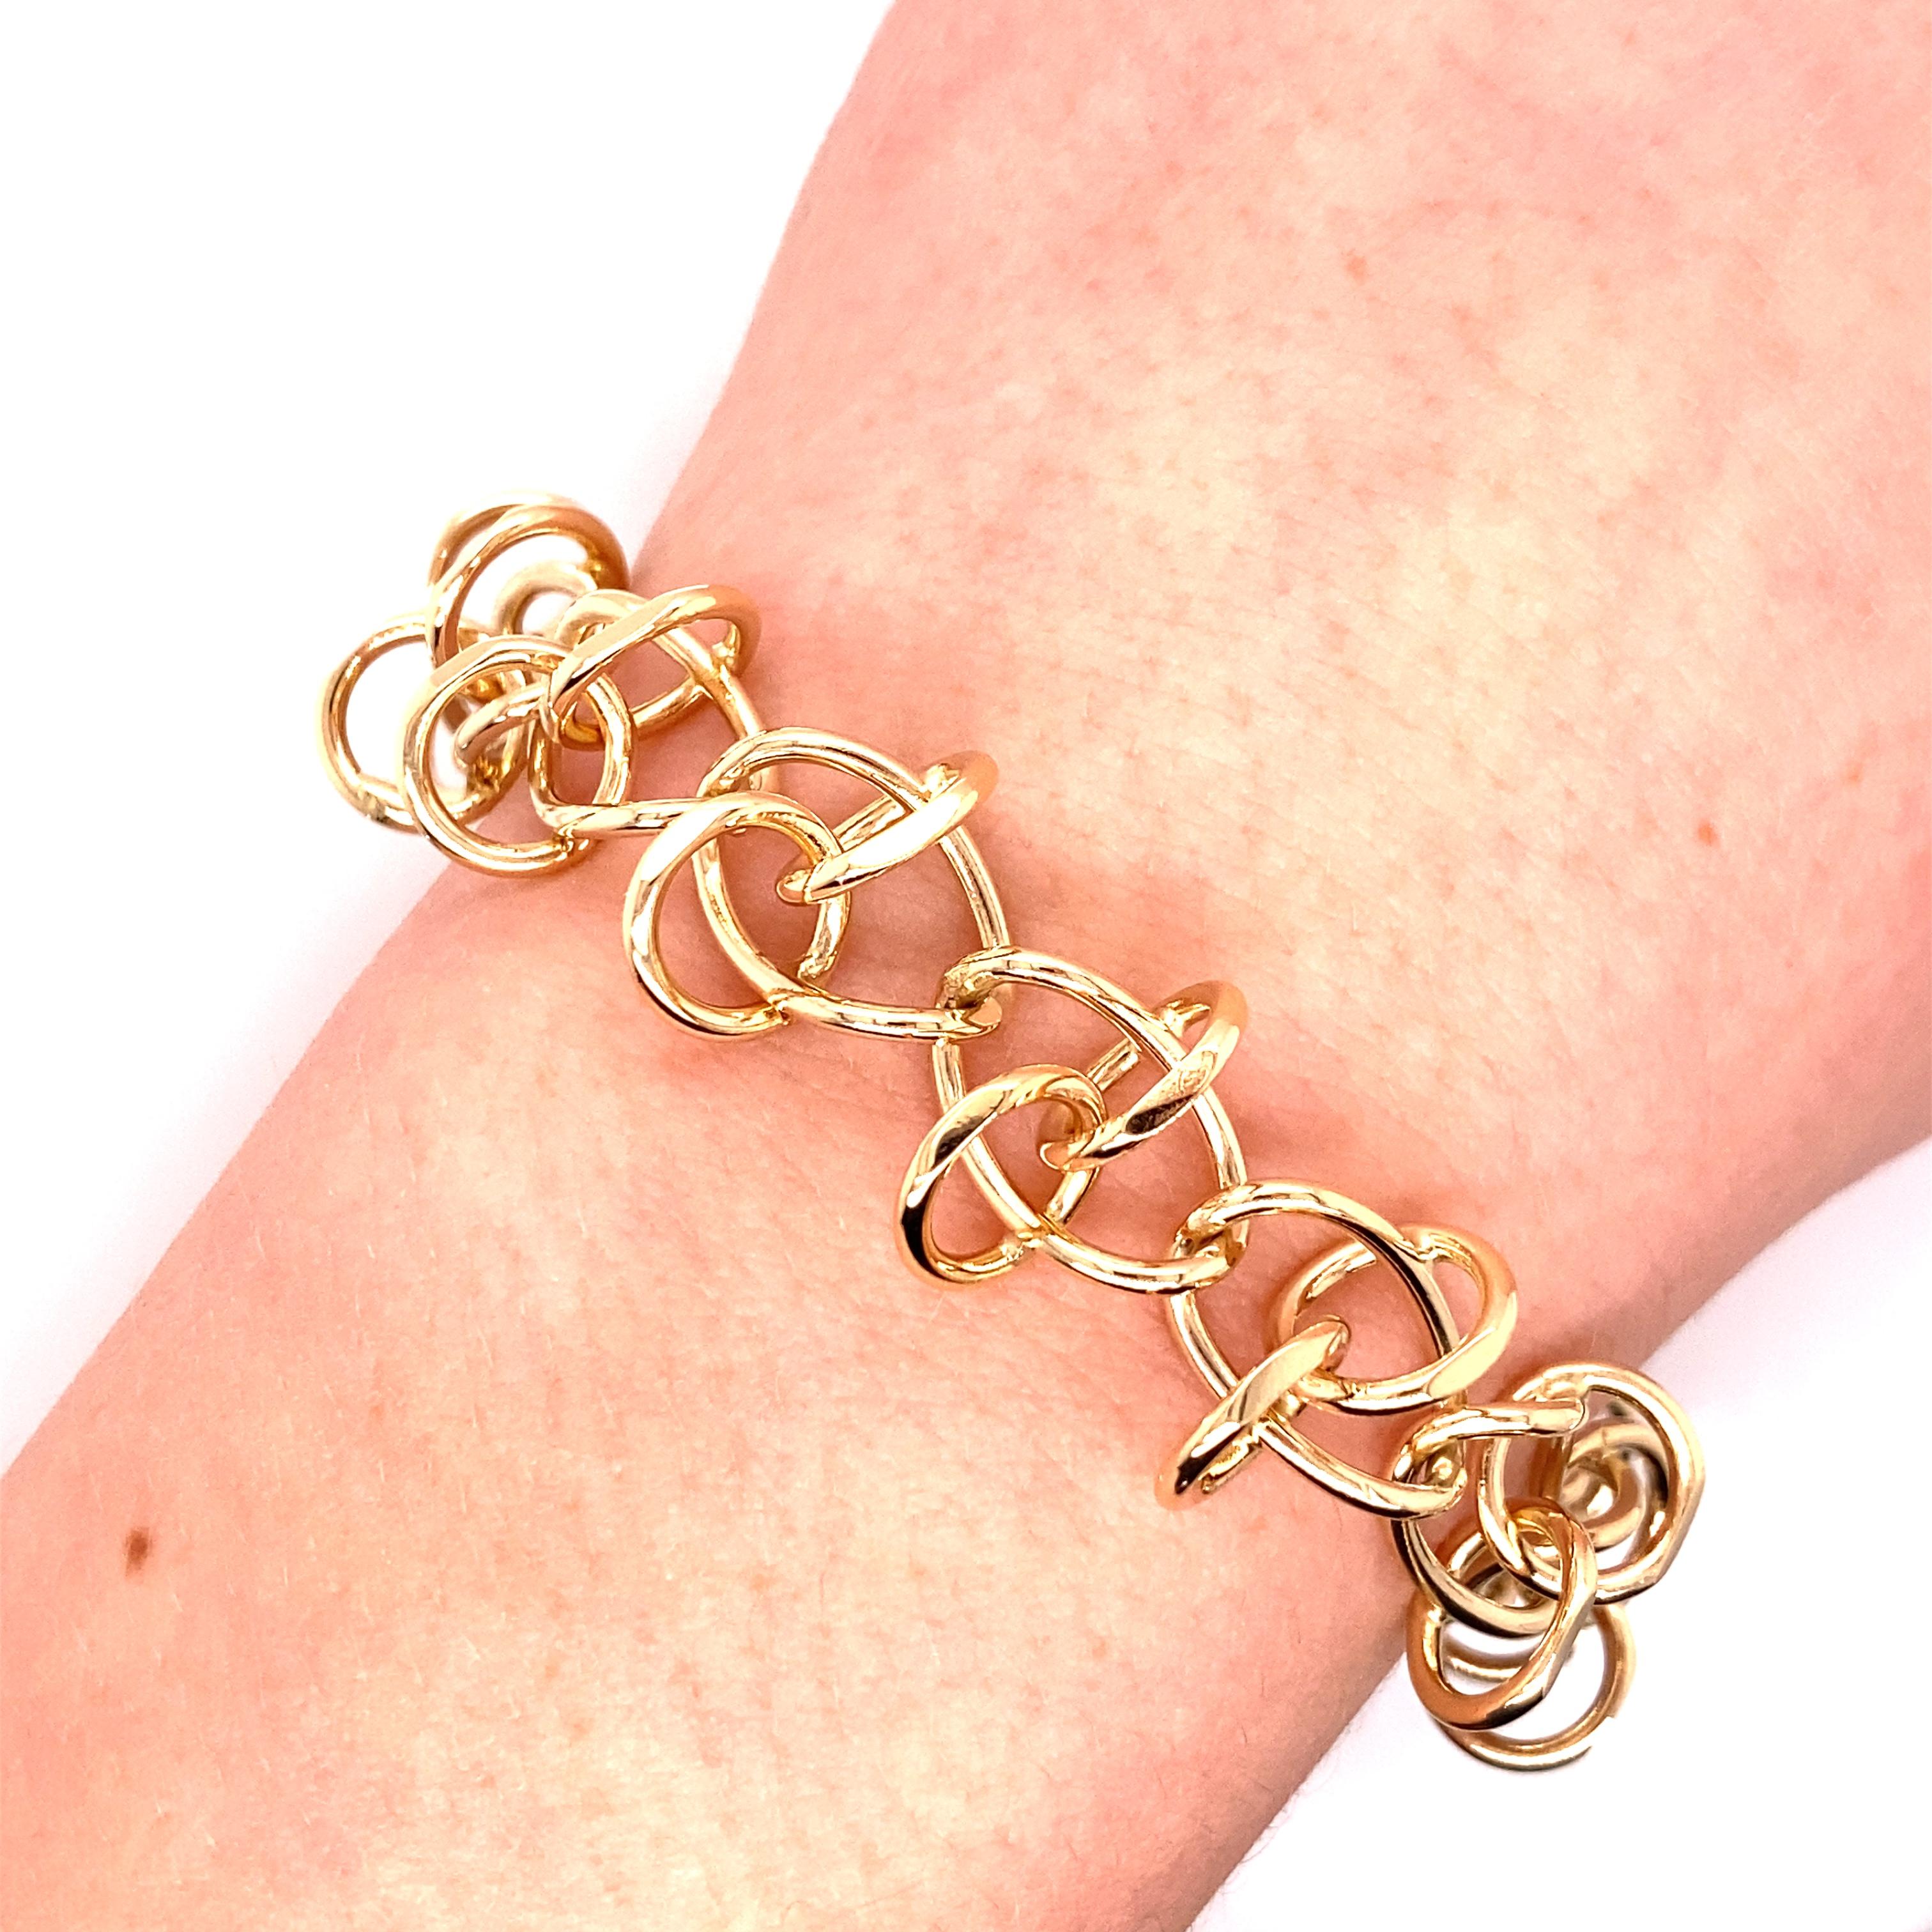 Vintage 1980's 14K Yellow Gold Charm Link Bracelet - The modern design link bracelet can be worn with or without charms. The bracelet measures 7 inches long and 1/2 inches wide and has a plunger clasp with a figure 8 safety. The bracelet weighs 26.4